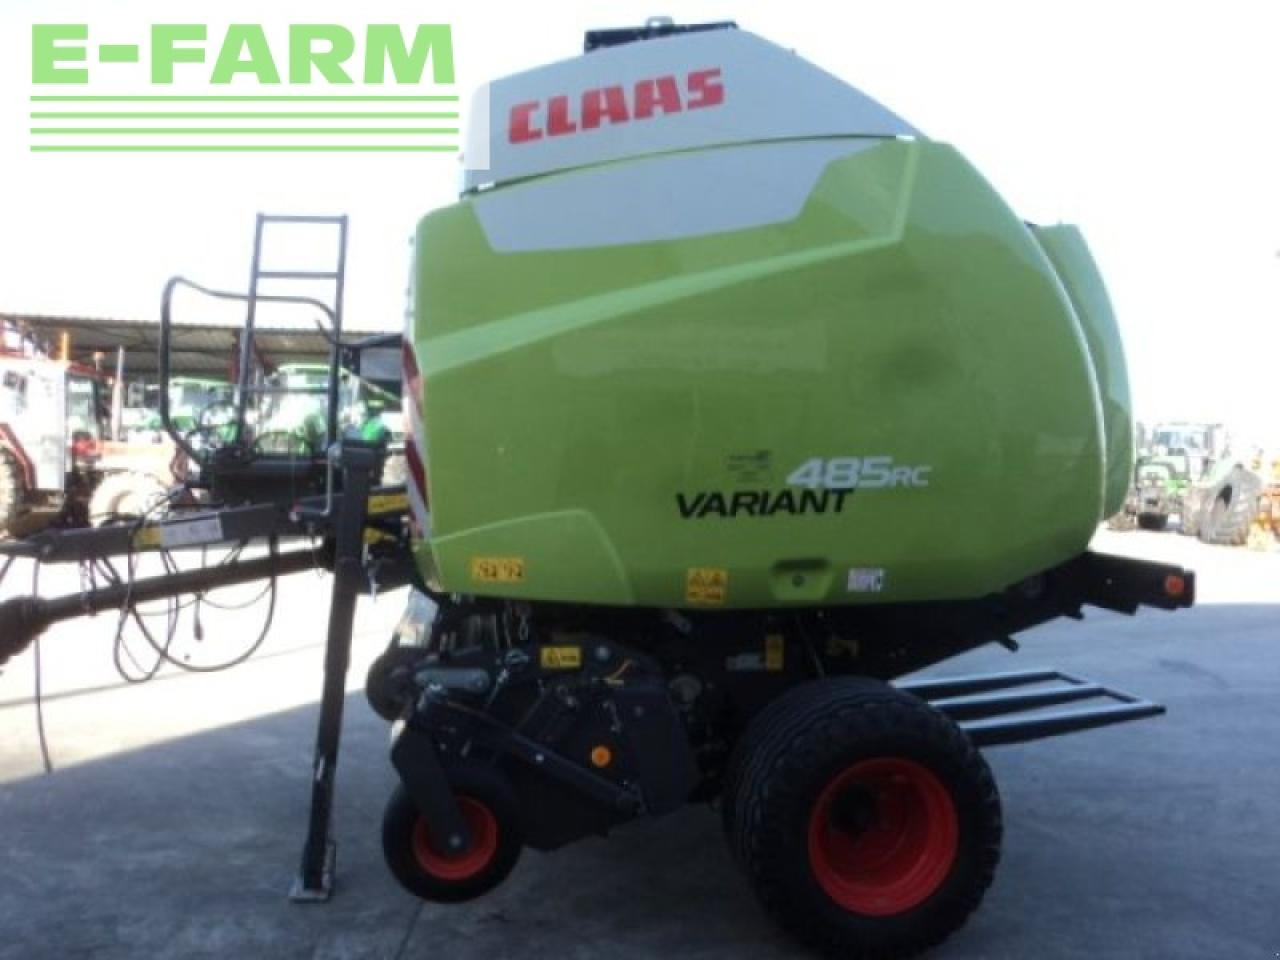 Tractor CLAAS variant 485 rc